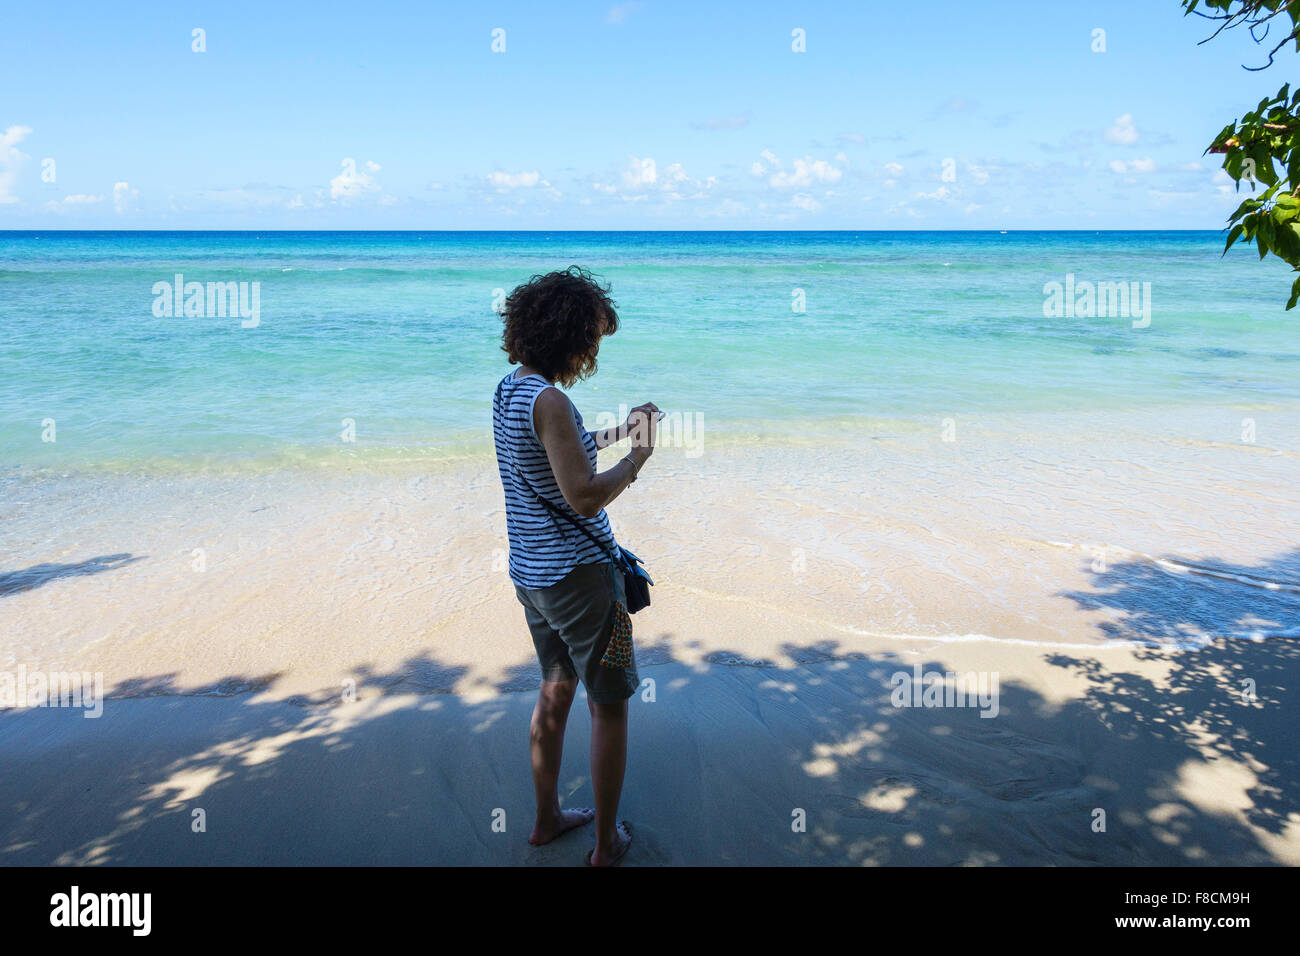 50 year old woman High Resolution Stock Photography and Images - Alamy